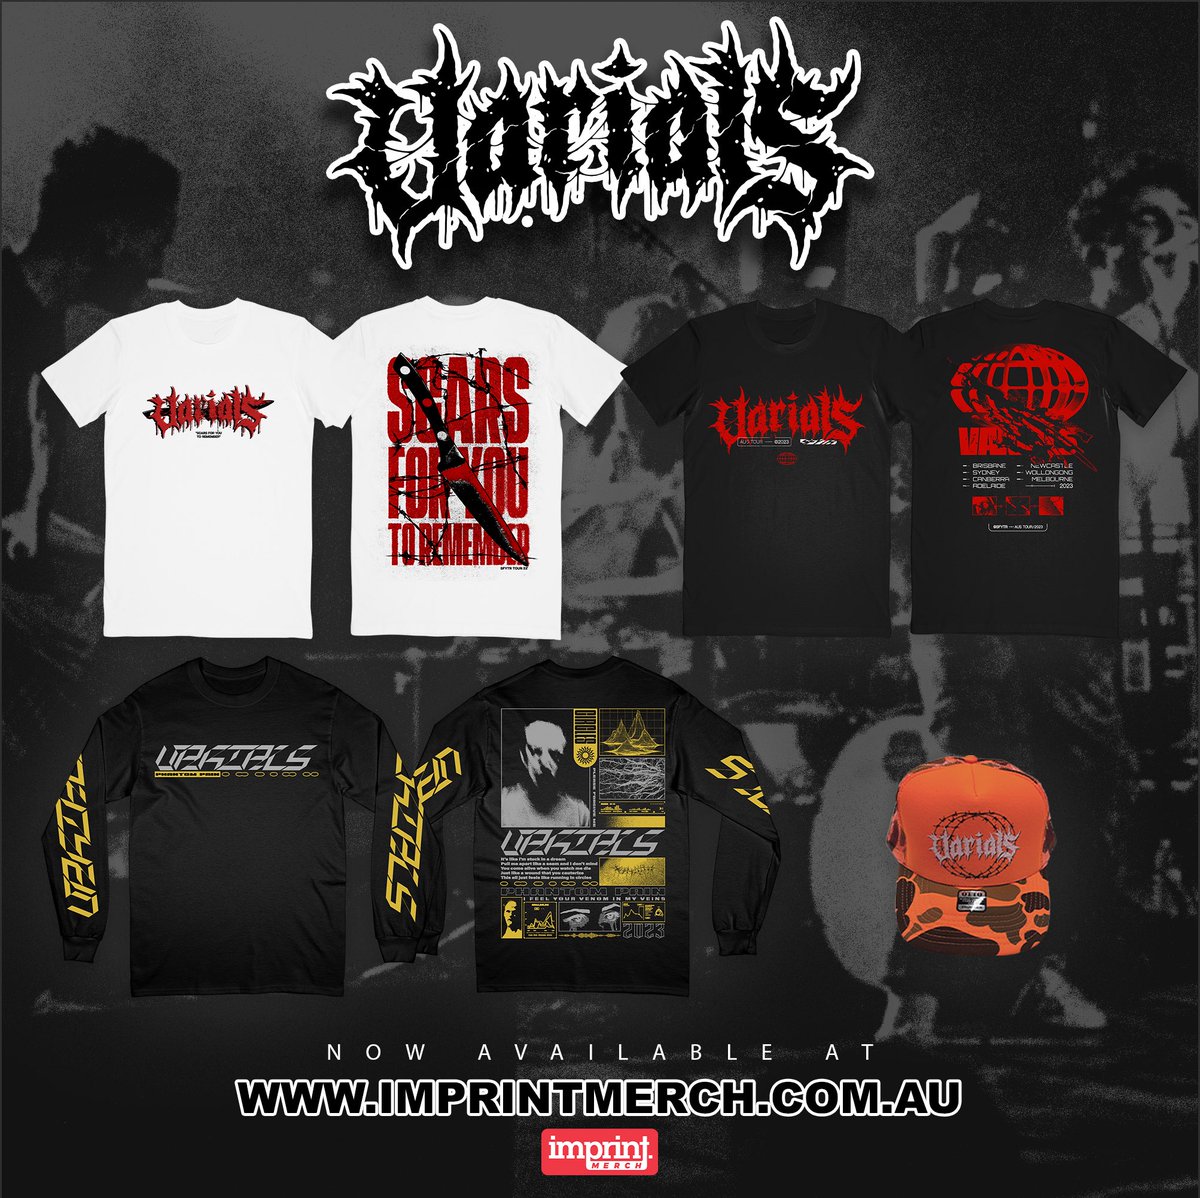 Teamed up with @imprintmerch for an Australian merch store check it! LINK: imprintmerch.com.au/collections/va…